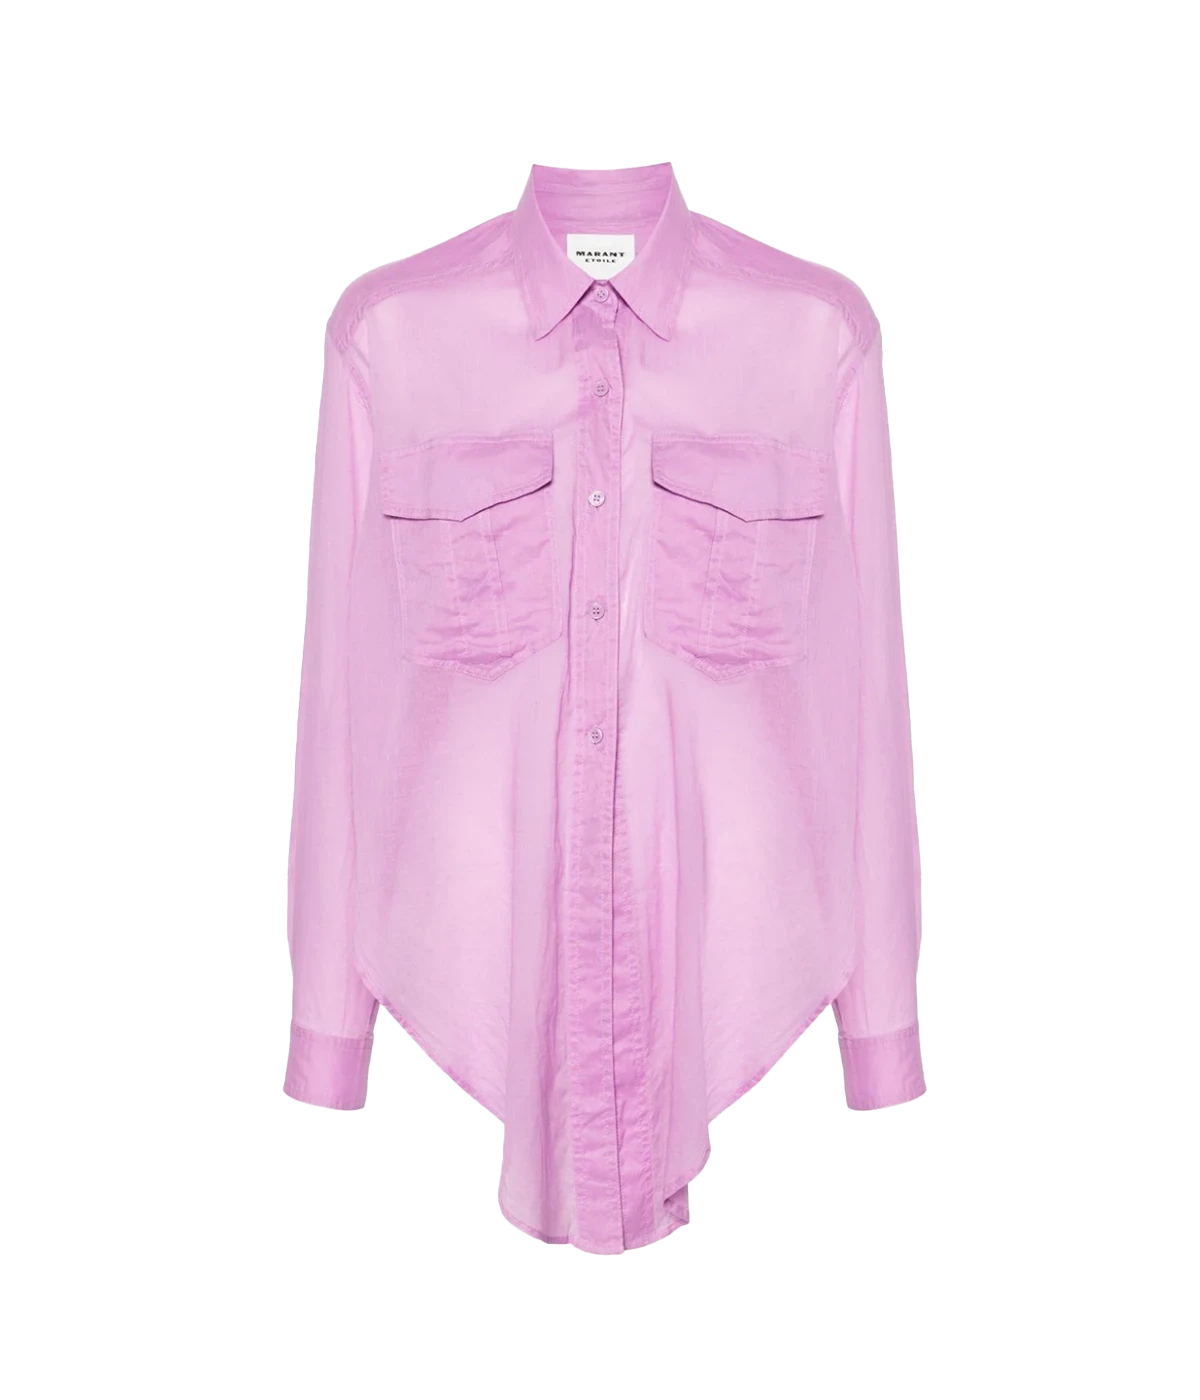 Long sleeve high low front button shirt by Isabel Marant. Wash and wear, bra friendly, versatile addition to your wardrobe. Isabel Marant signature mauve cotton voile. 